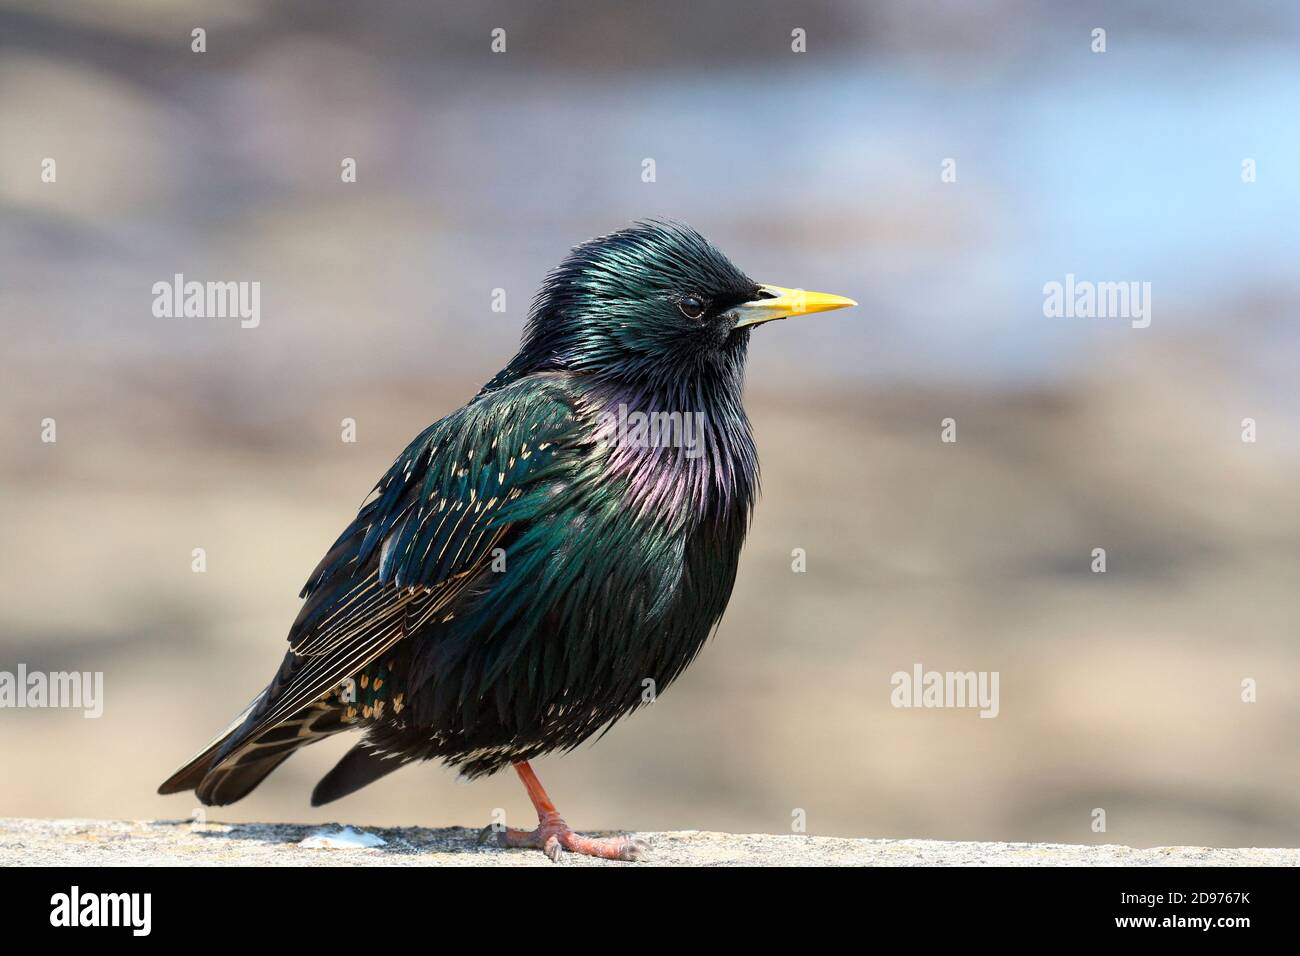 Adult starling (Sturnus vulgaris) in nuptial plumage on a low wall, Finistere, France Stock Photo